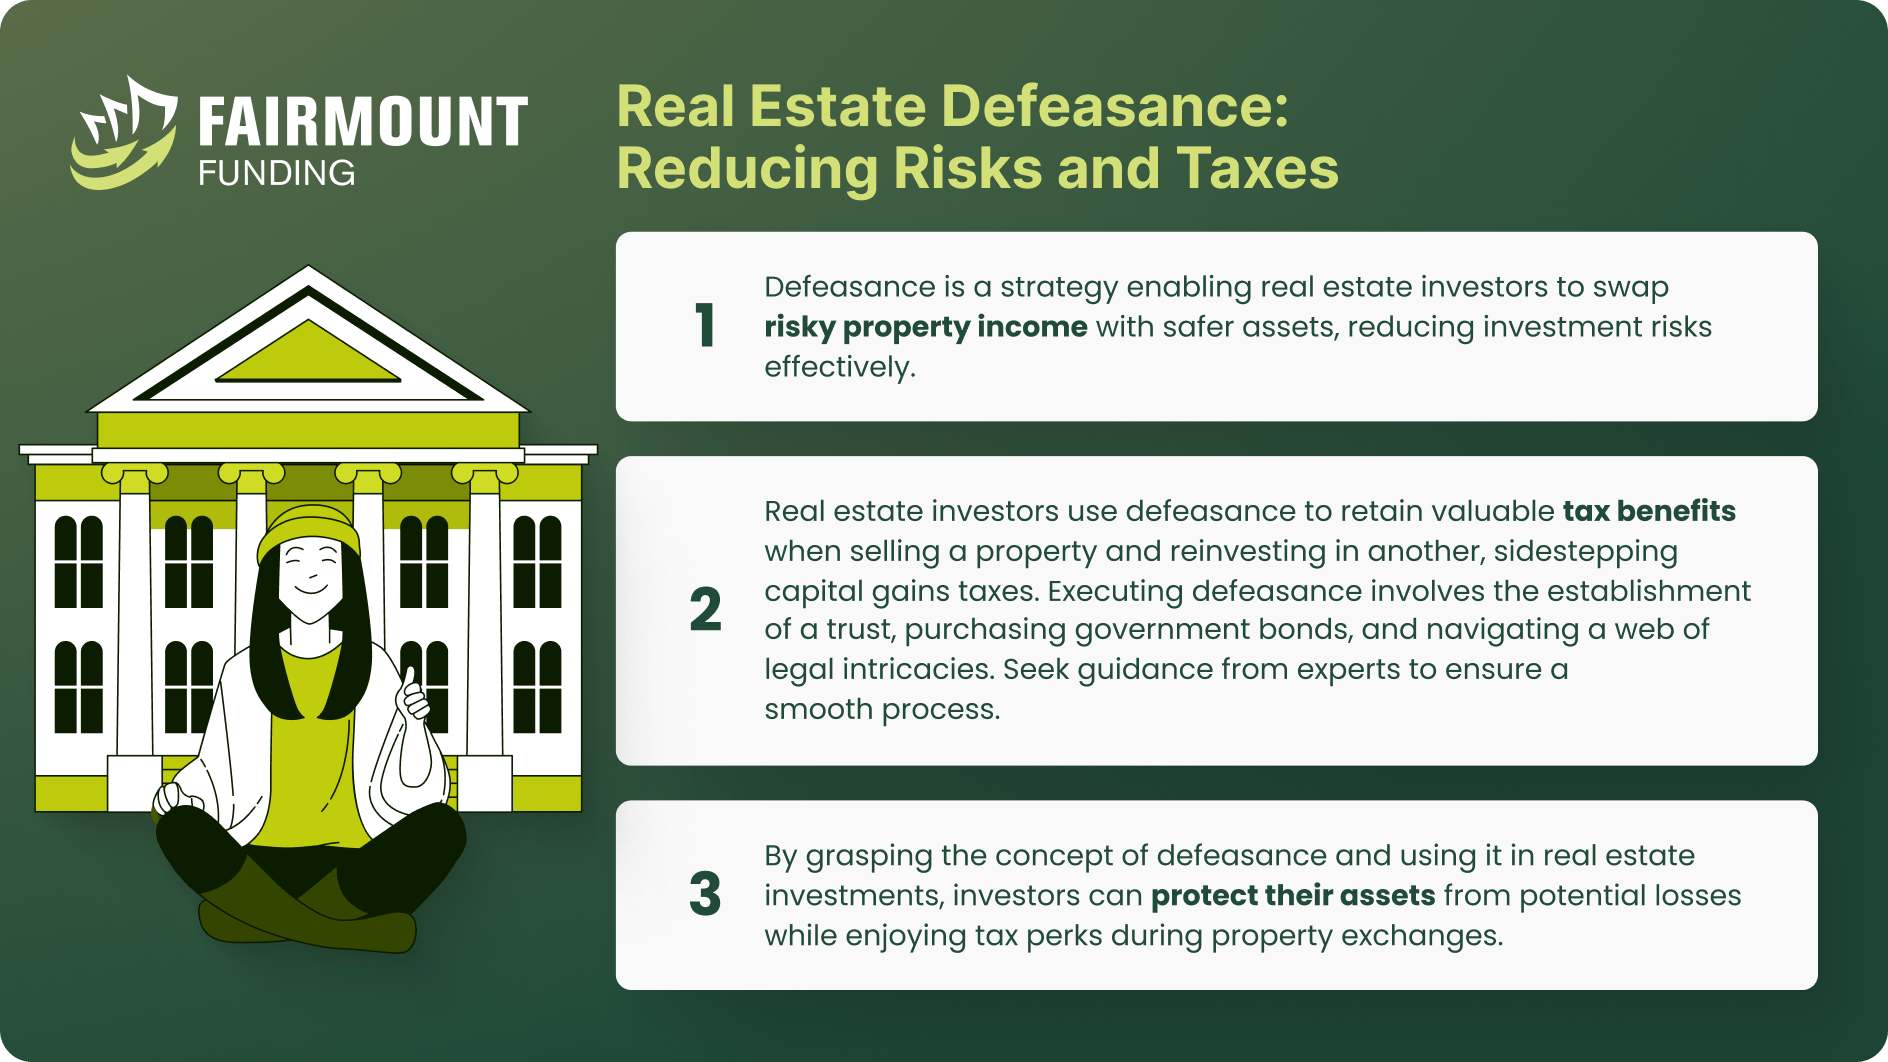 understanding defeasance and how real estate investors can use it